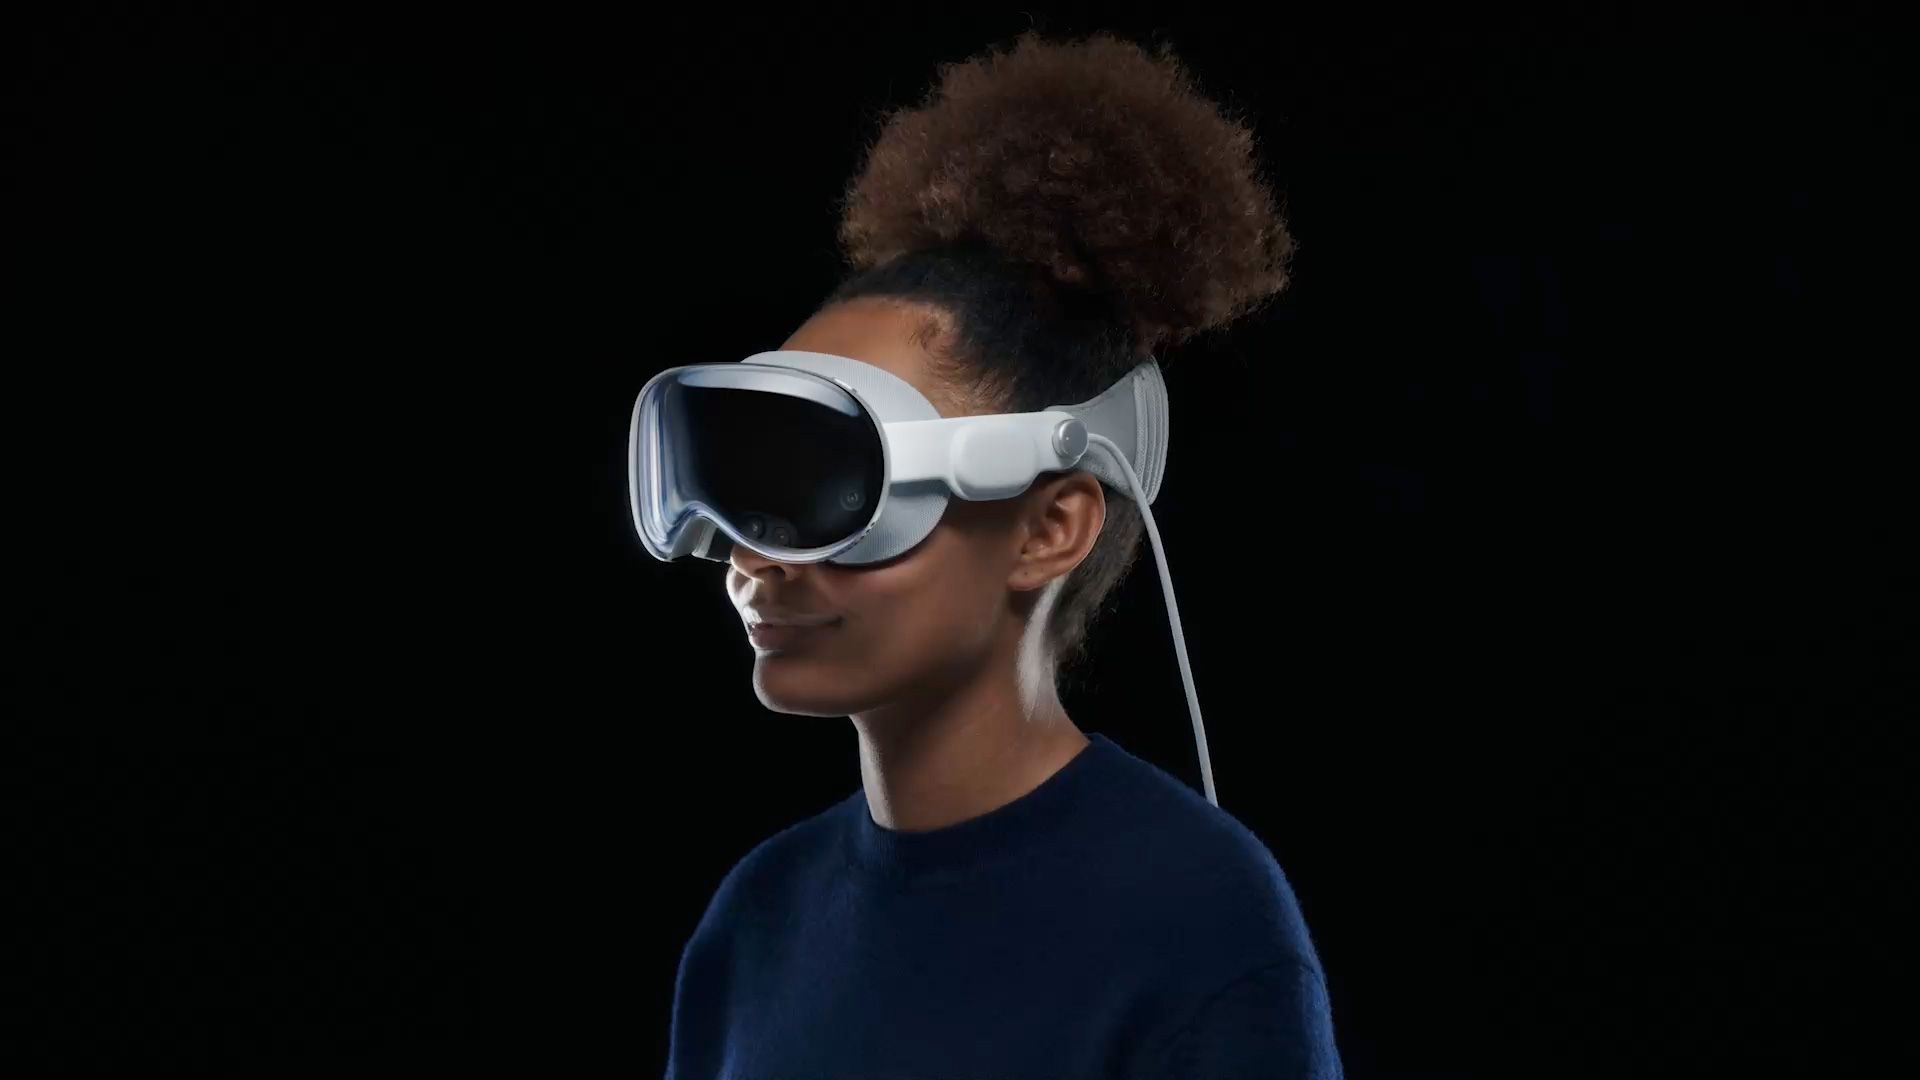 Sony May Be Prepping PSVR 2 Headset With Built-in Cameras, AR Support